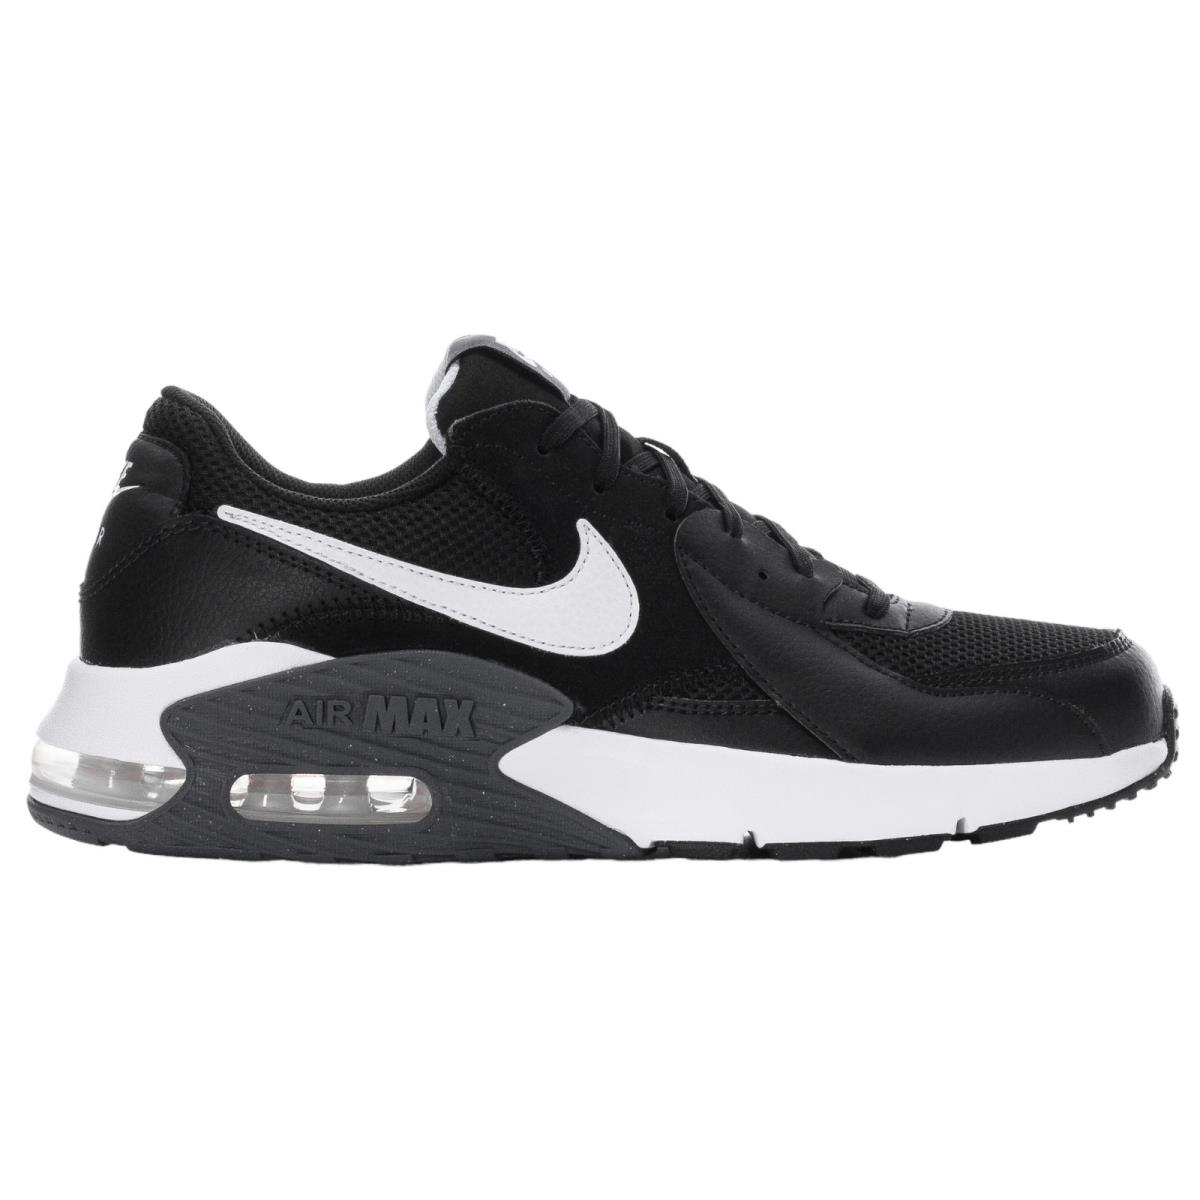 Nike Air Max Excee Men`s Casual Shoes All Colors US Sizes 7-14 Black/Dark Grey/White